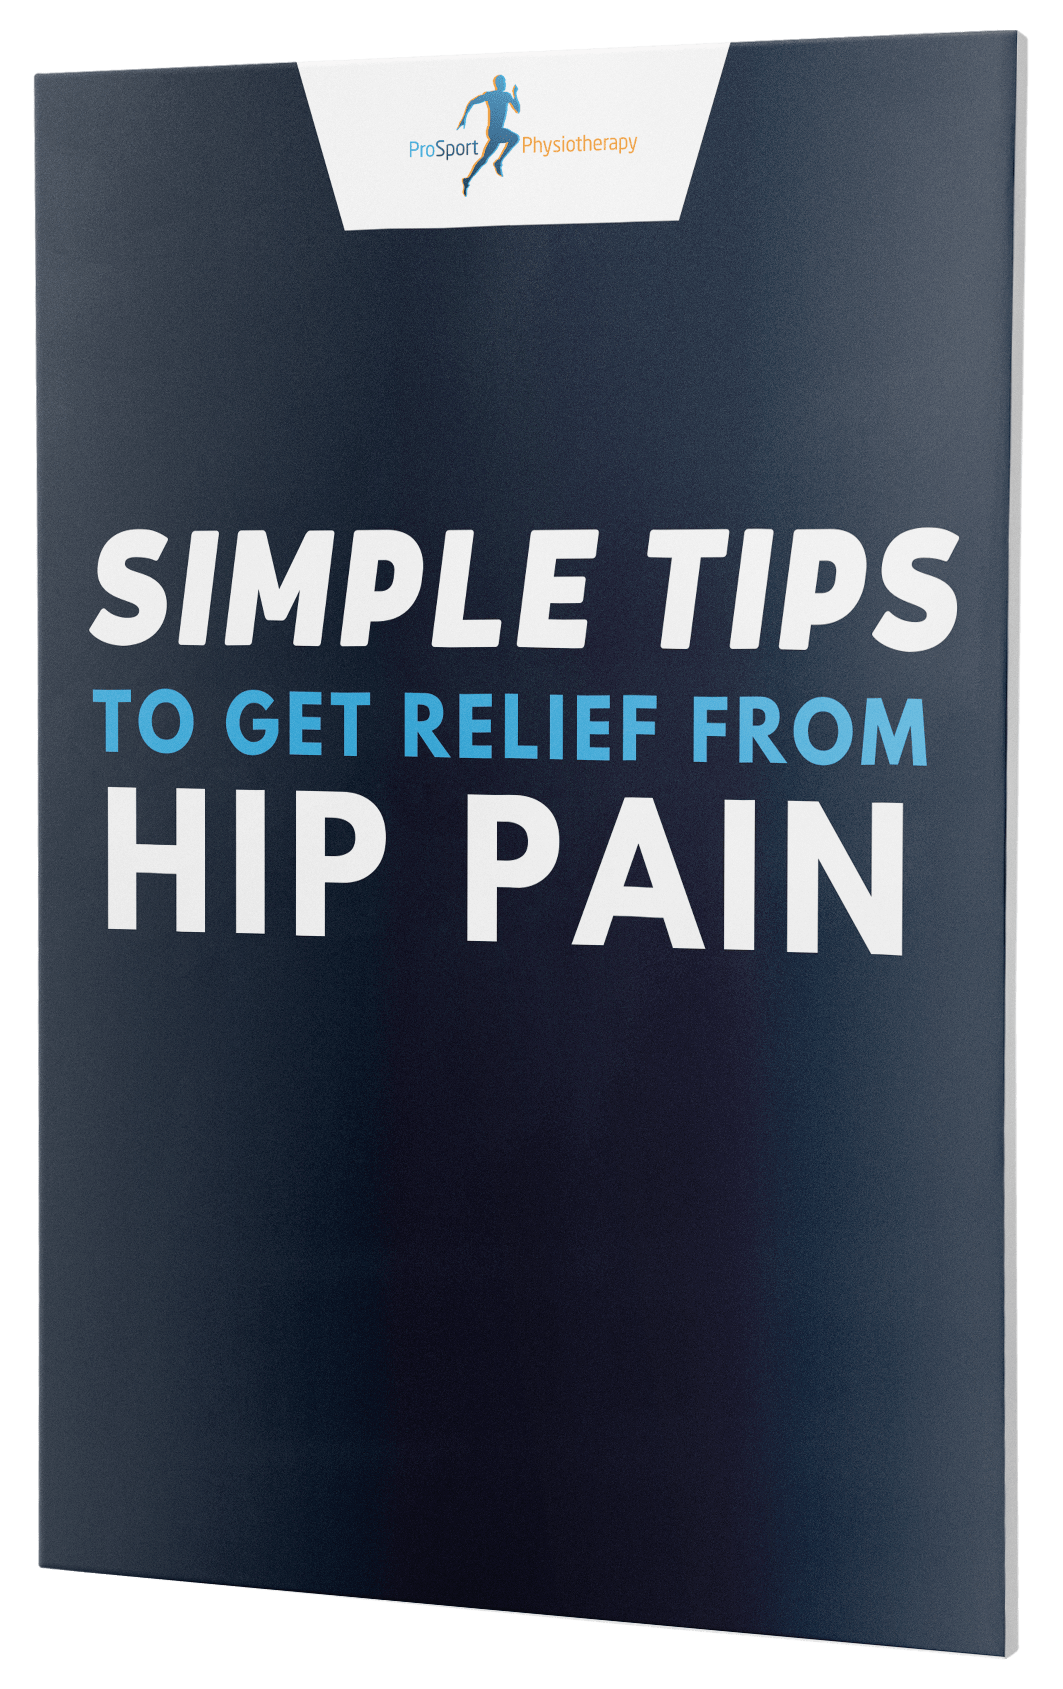 Hip Pain Relief PDF Guide - Pro Sport Physiotherapy Huddersfield Clinic